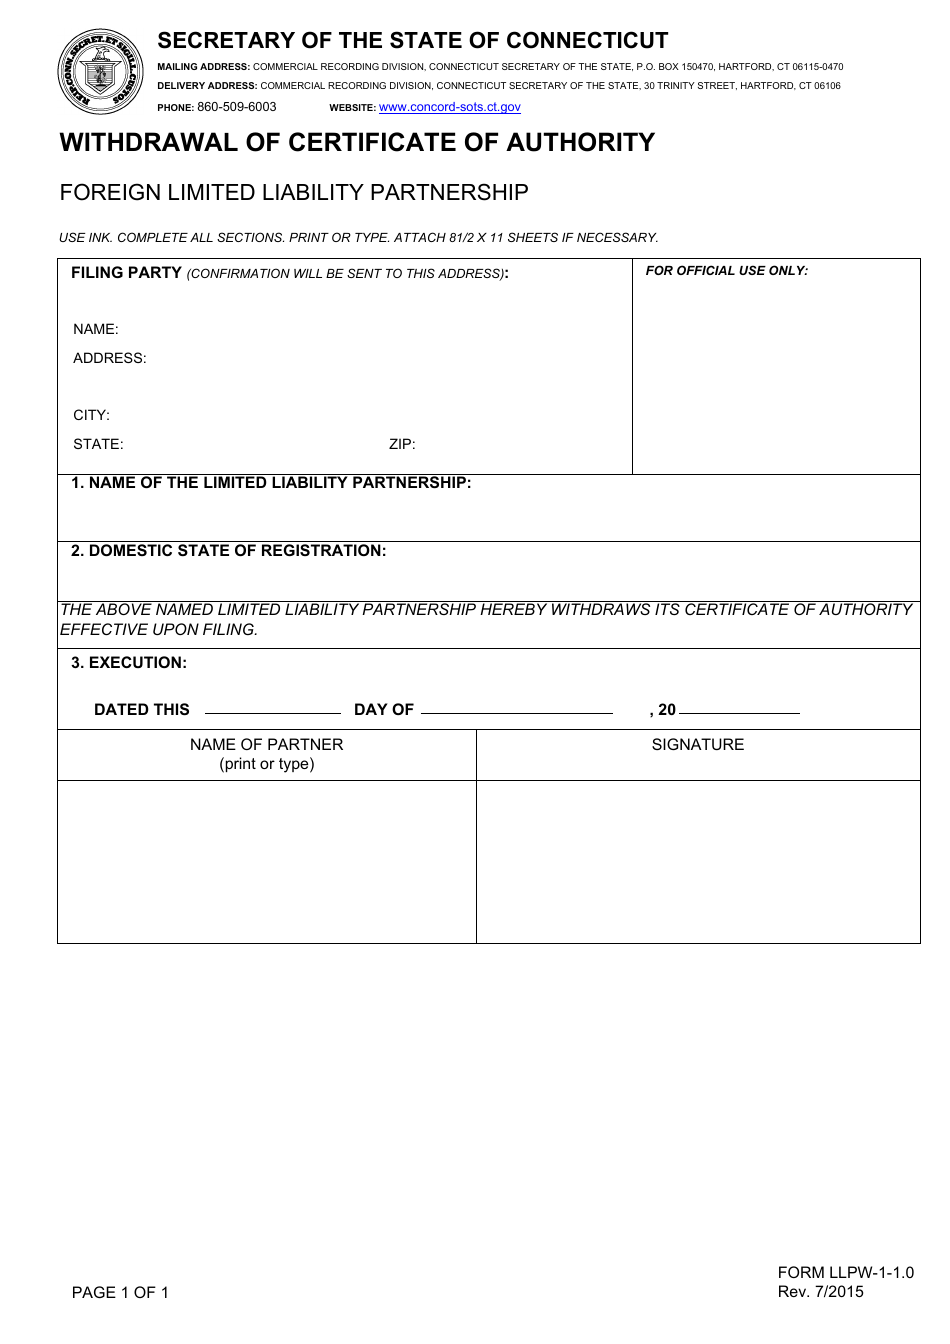 Form LLPW-1-1.0 Withdrawal of Certificate of Authority - Foreign Limited Liability Partnership - Connecticut, Page 1